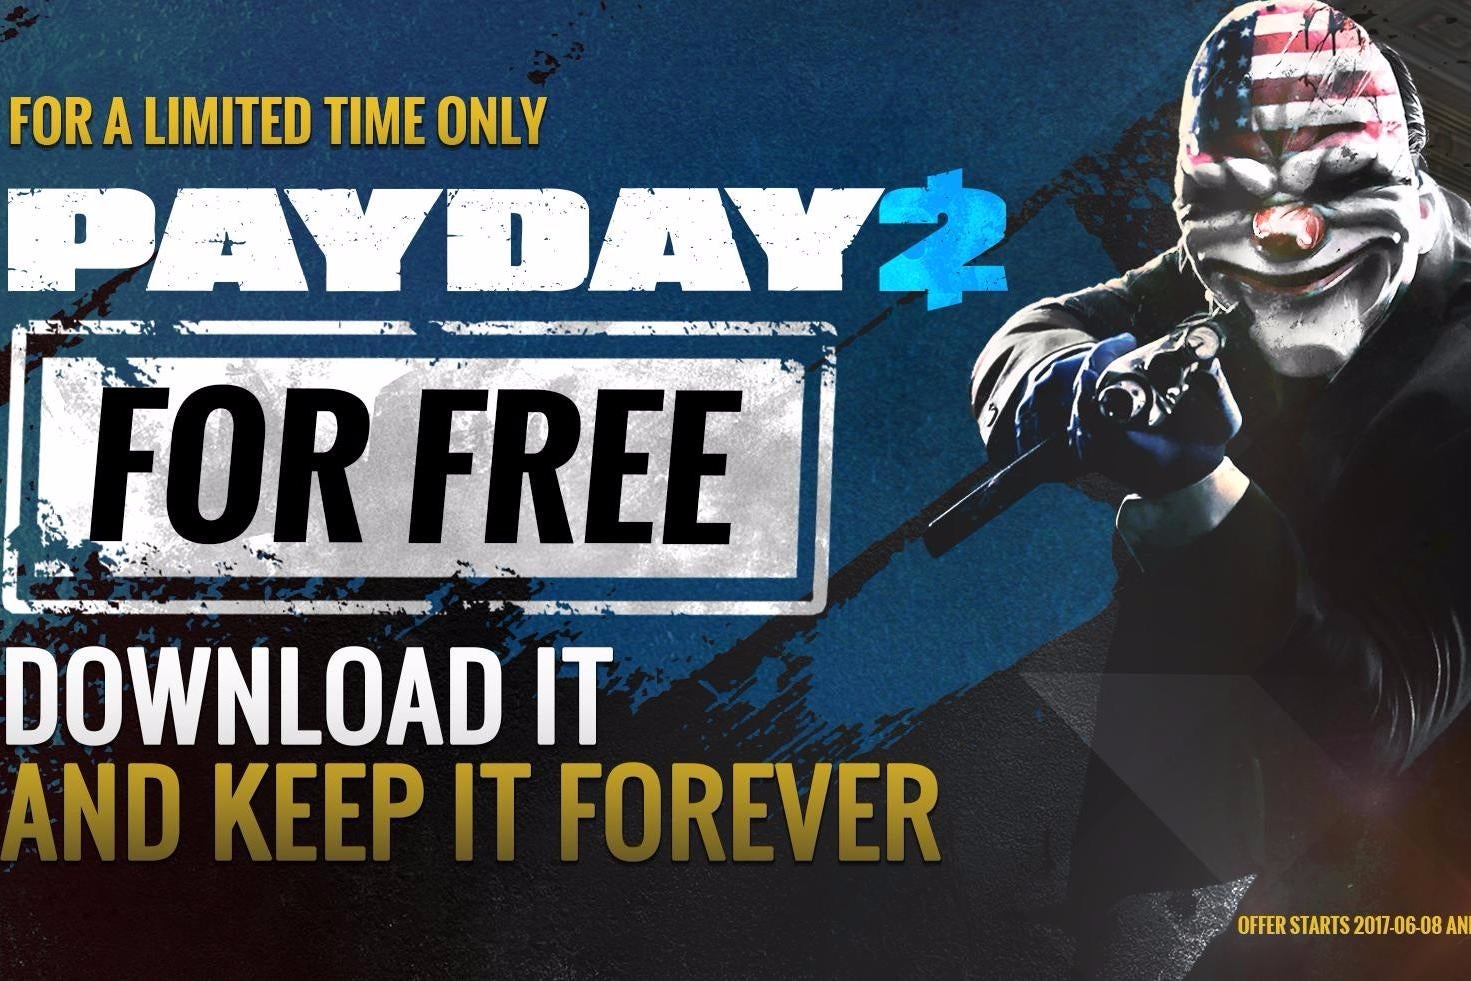 Image for Payday 2 is giving away 5 million free copies on Steam